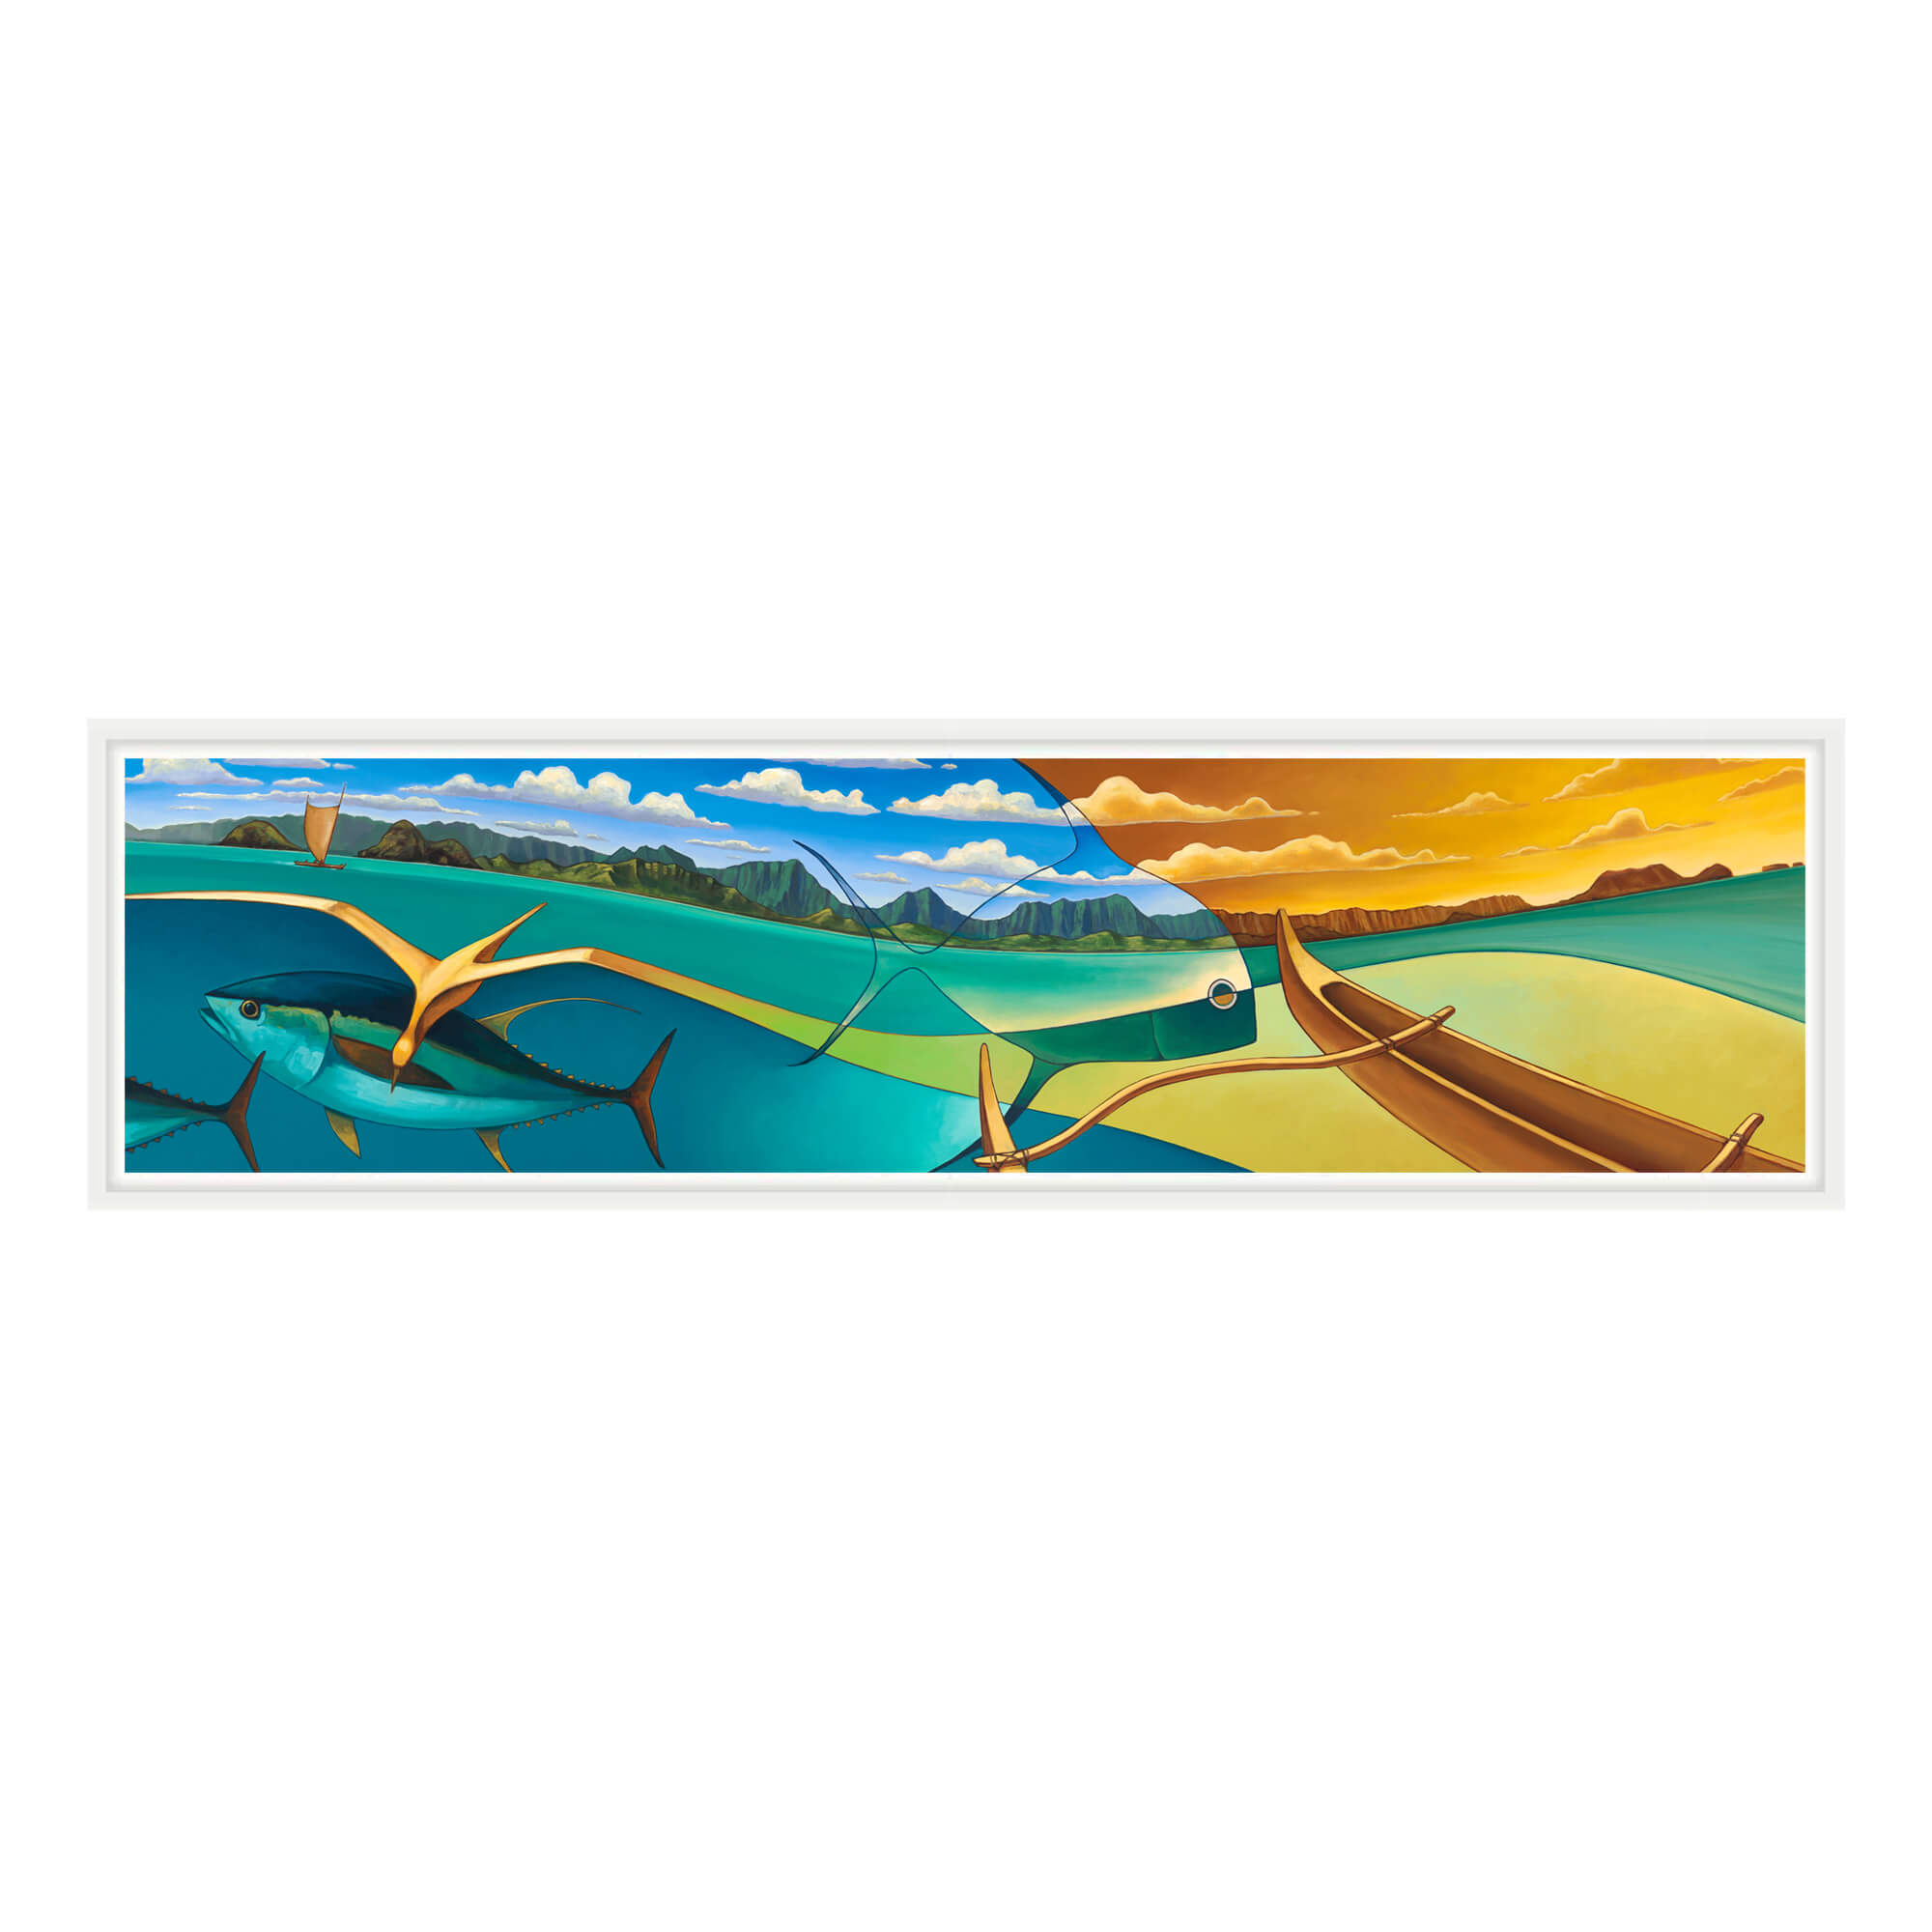 A panoramic scene of a tropical island by Hawaii artist Colin Redican